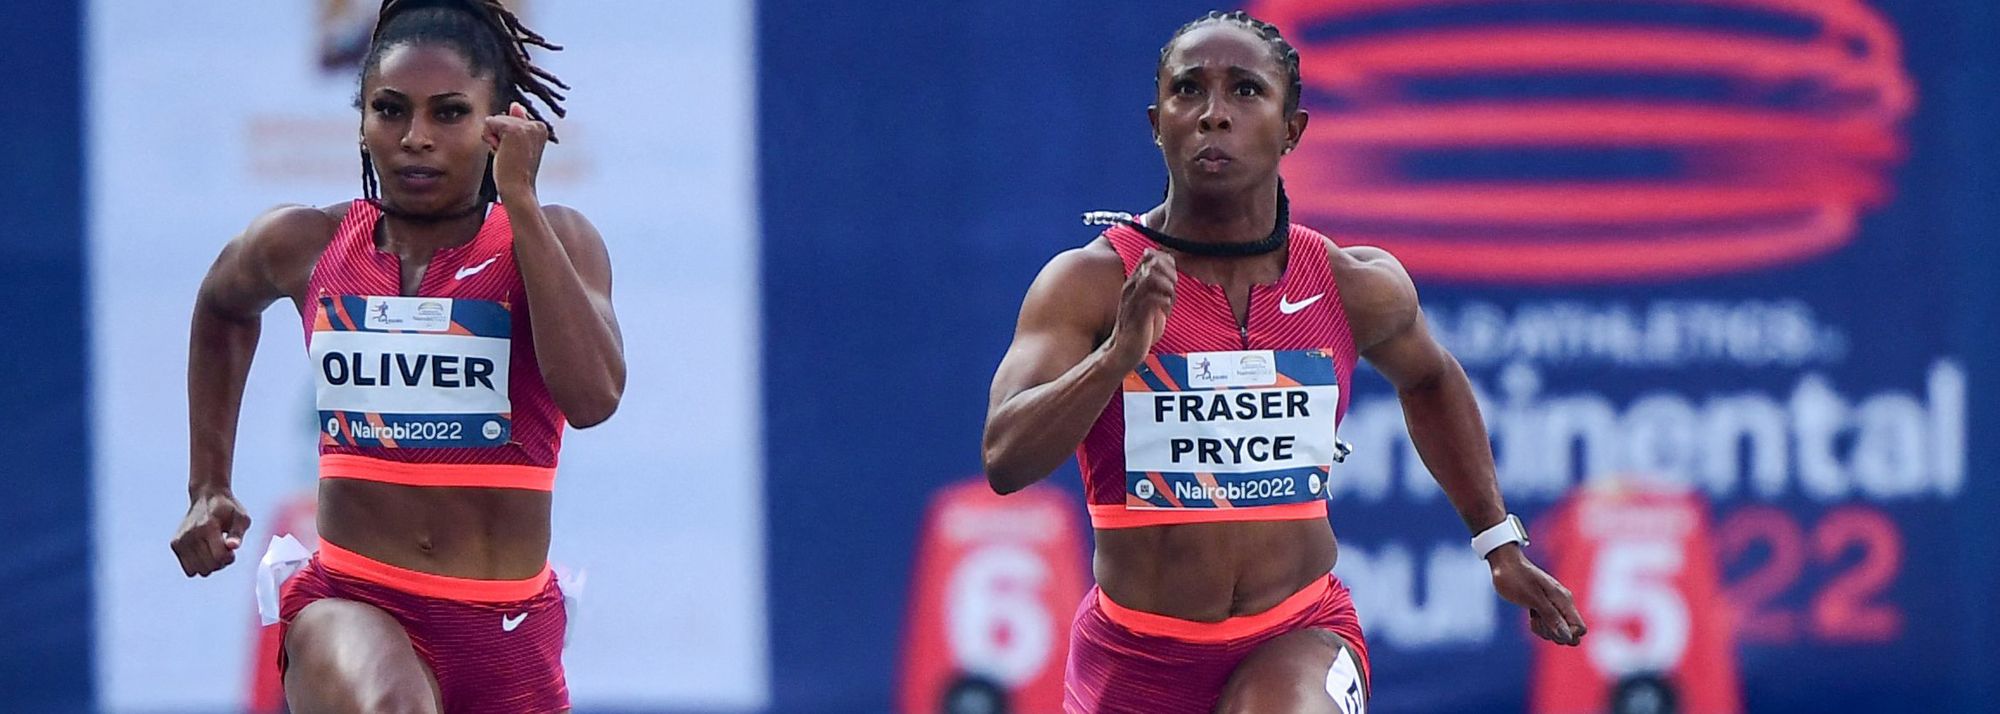 Shelly-Ann Fraser-Pryce, Kirani James and Ferdinand Omanyala announced for the World Athletics Continental Tour Gold meeting